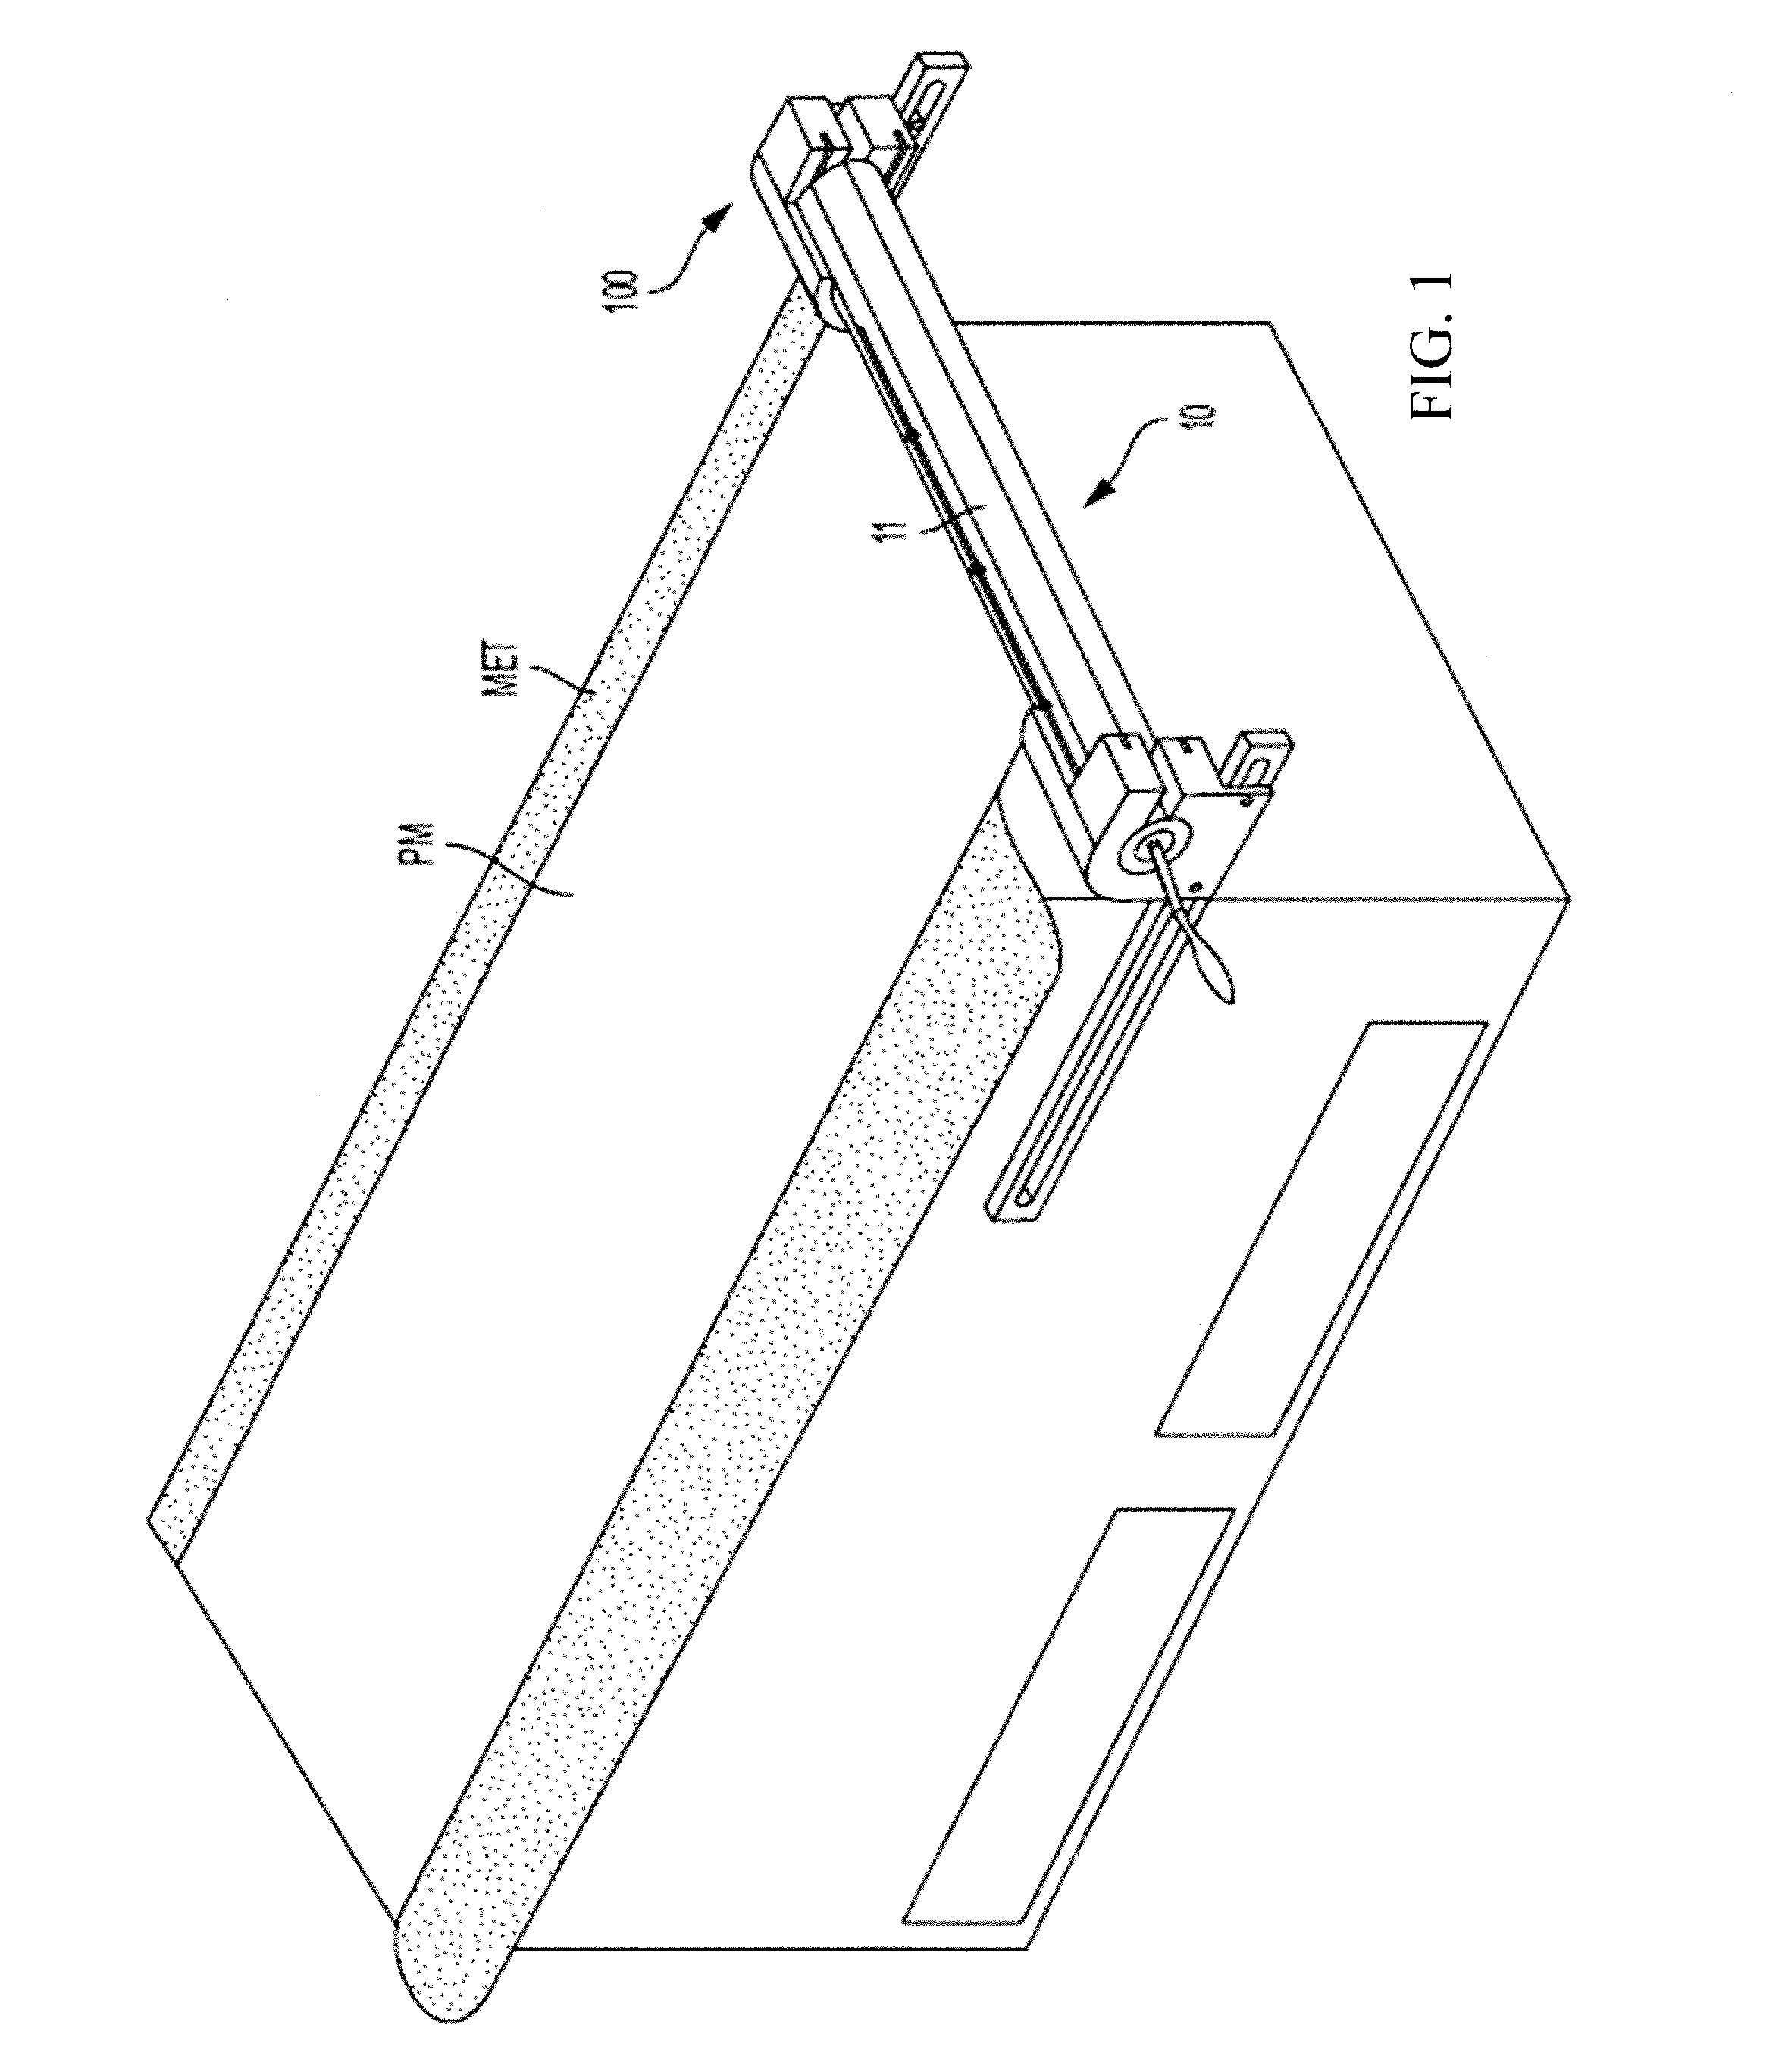 Tabletop Protective Covering Disposal Systems and Related Methods